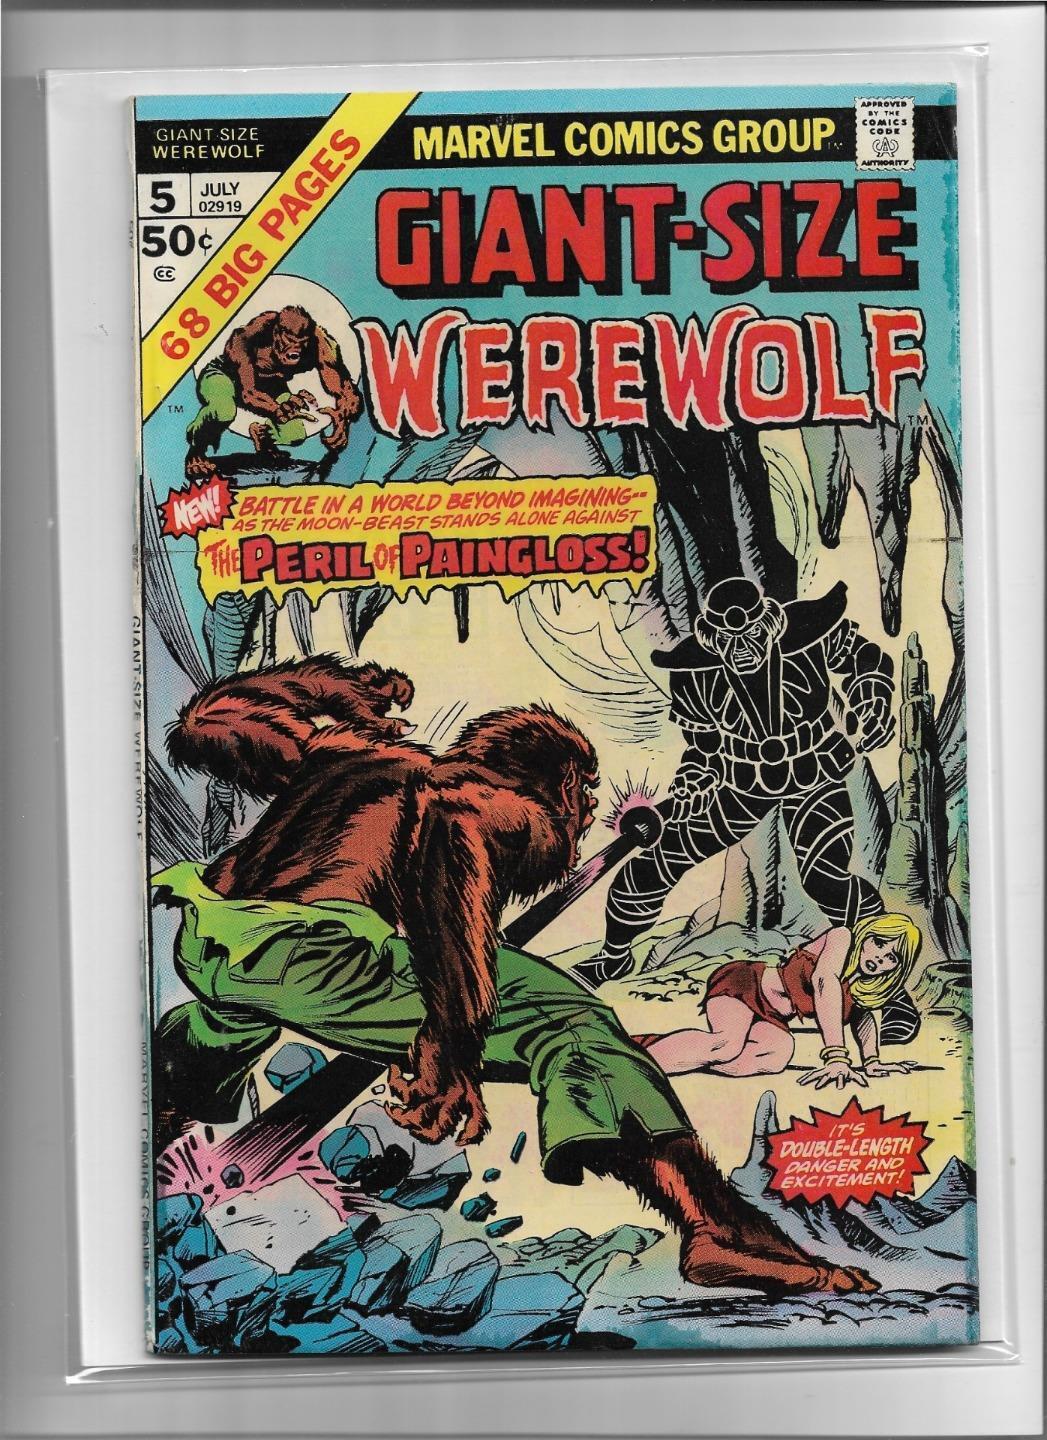 GIANT-SIZE WEREWOLF #5 1975 VERY GOOD 4.0 4567 blue ink stains